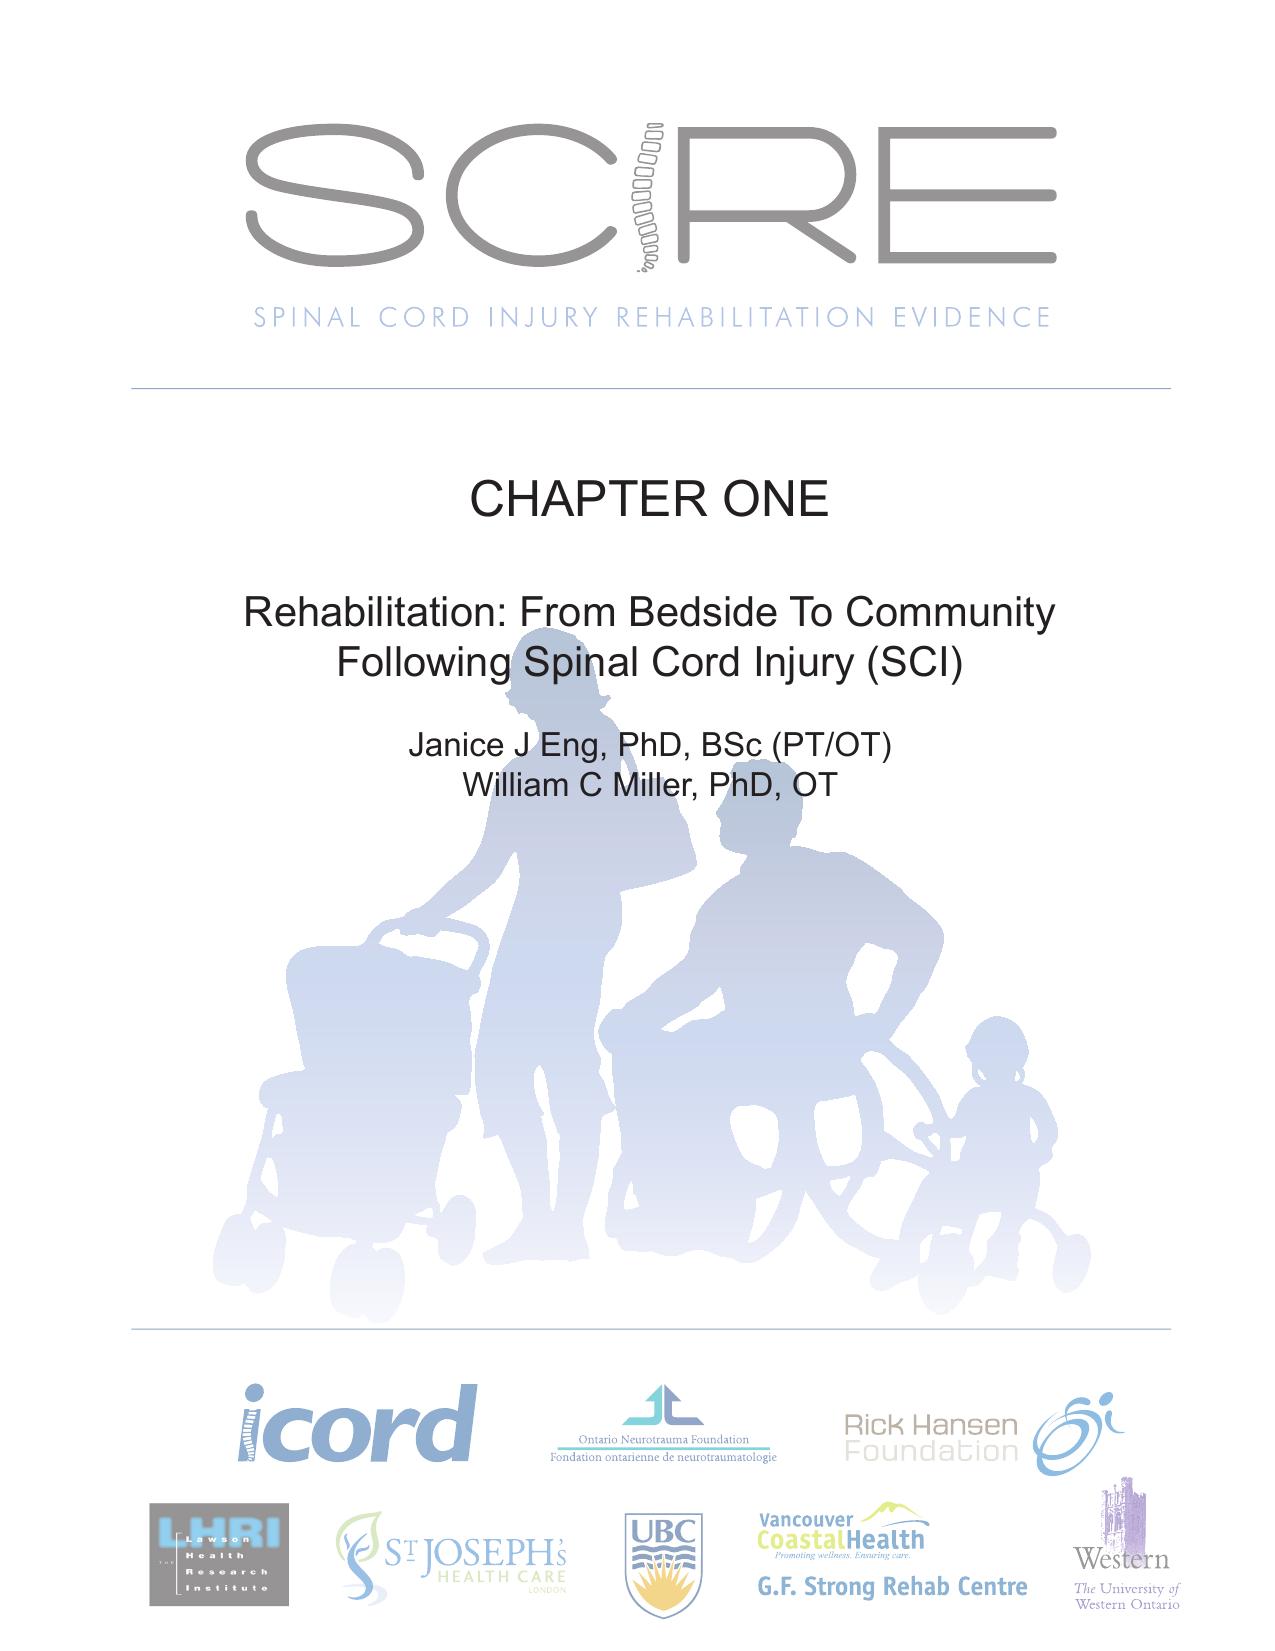 Rehabilitation: From Bedside to Community Following Spinal Cord Injury